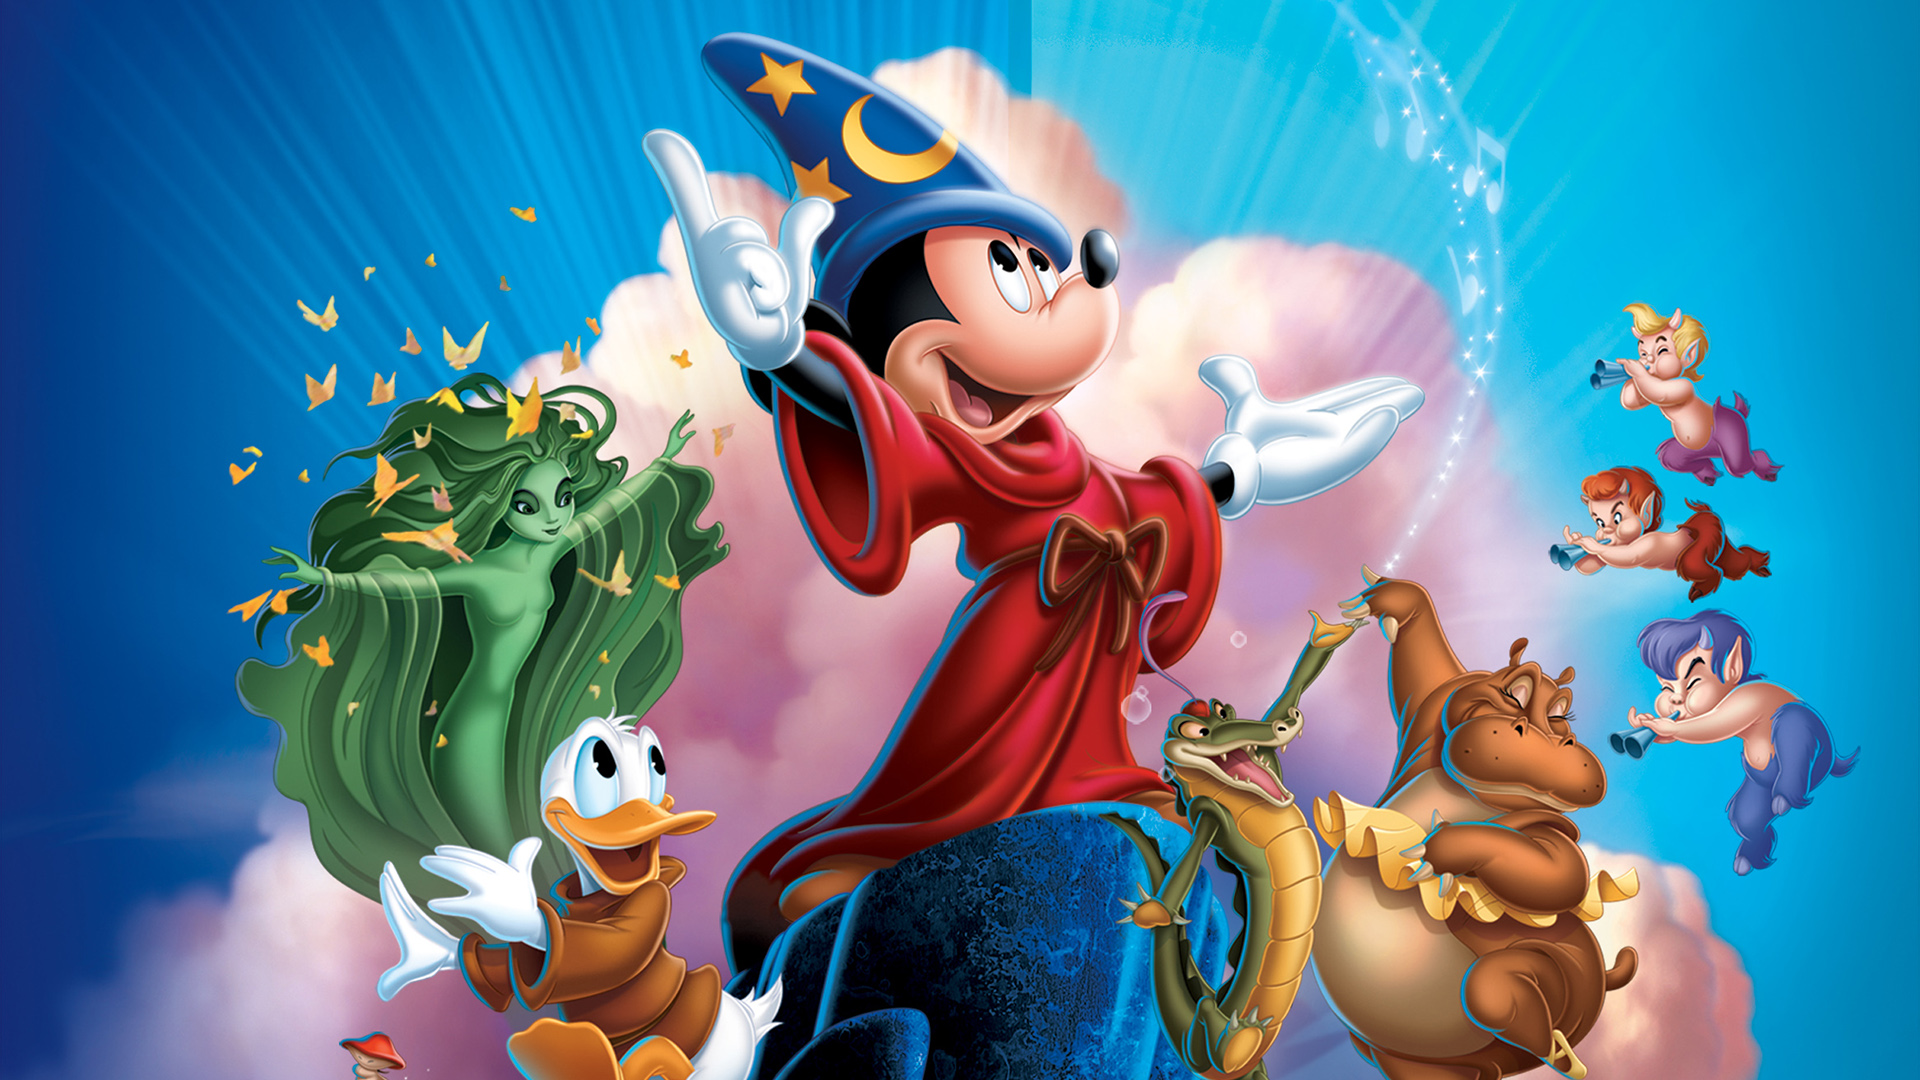 More Disney Movies Come to Netflix | Cord Cutters News